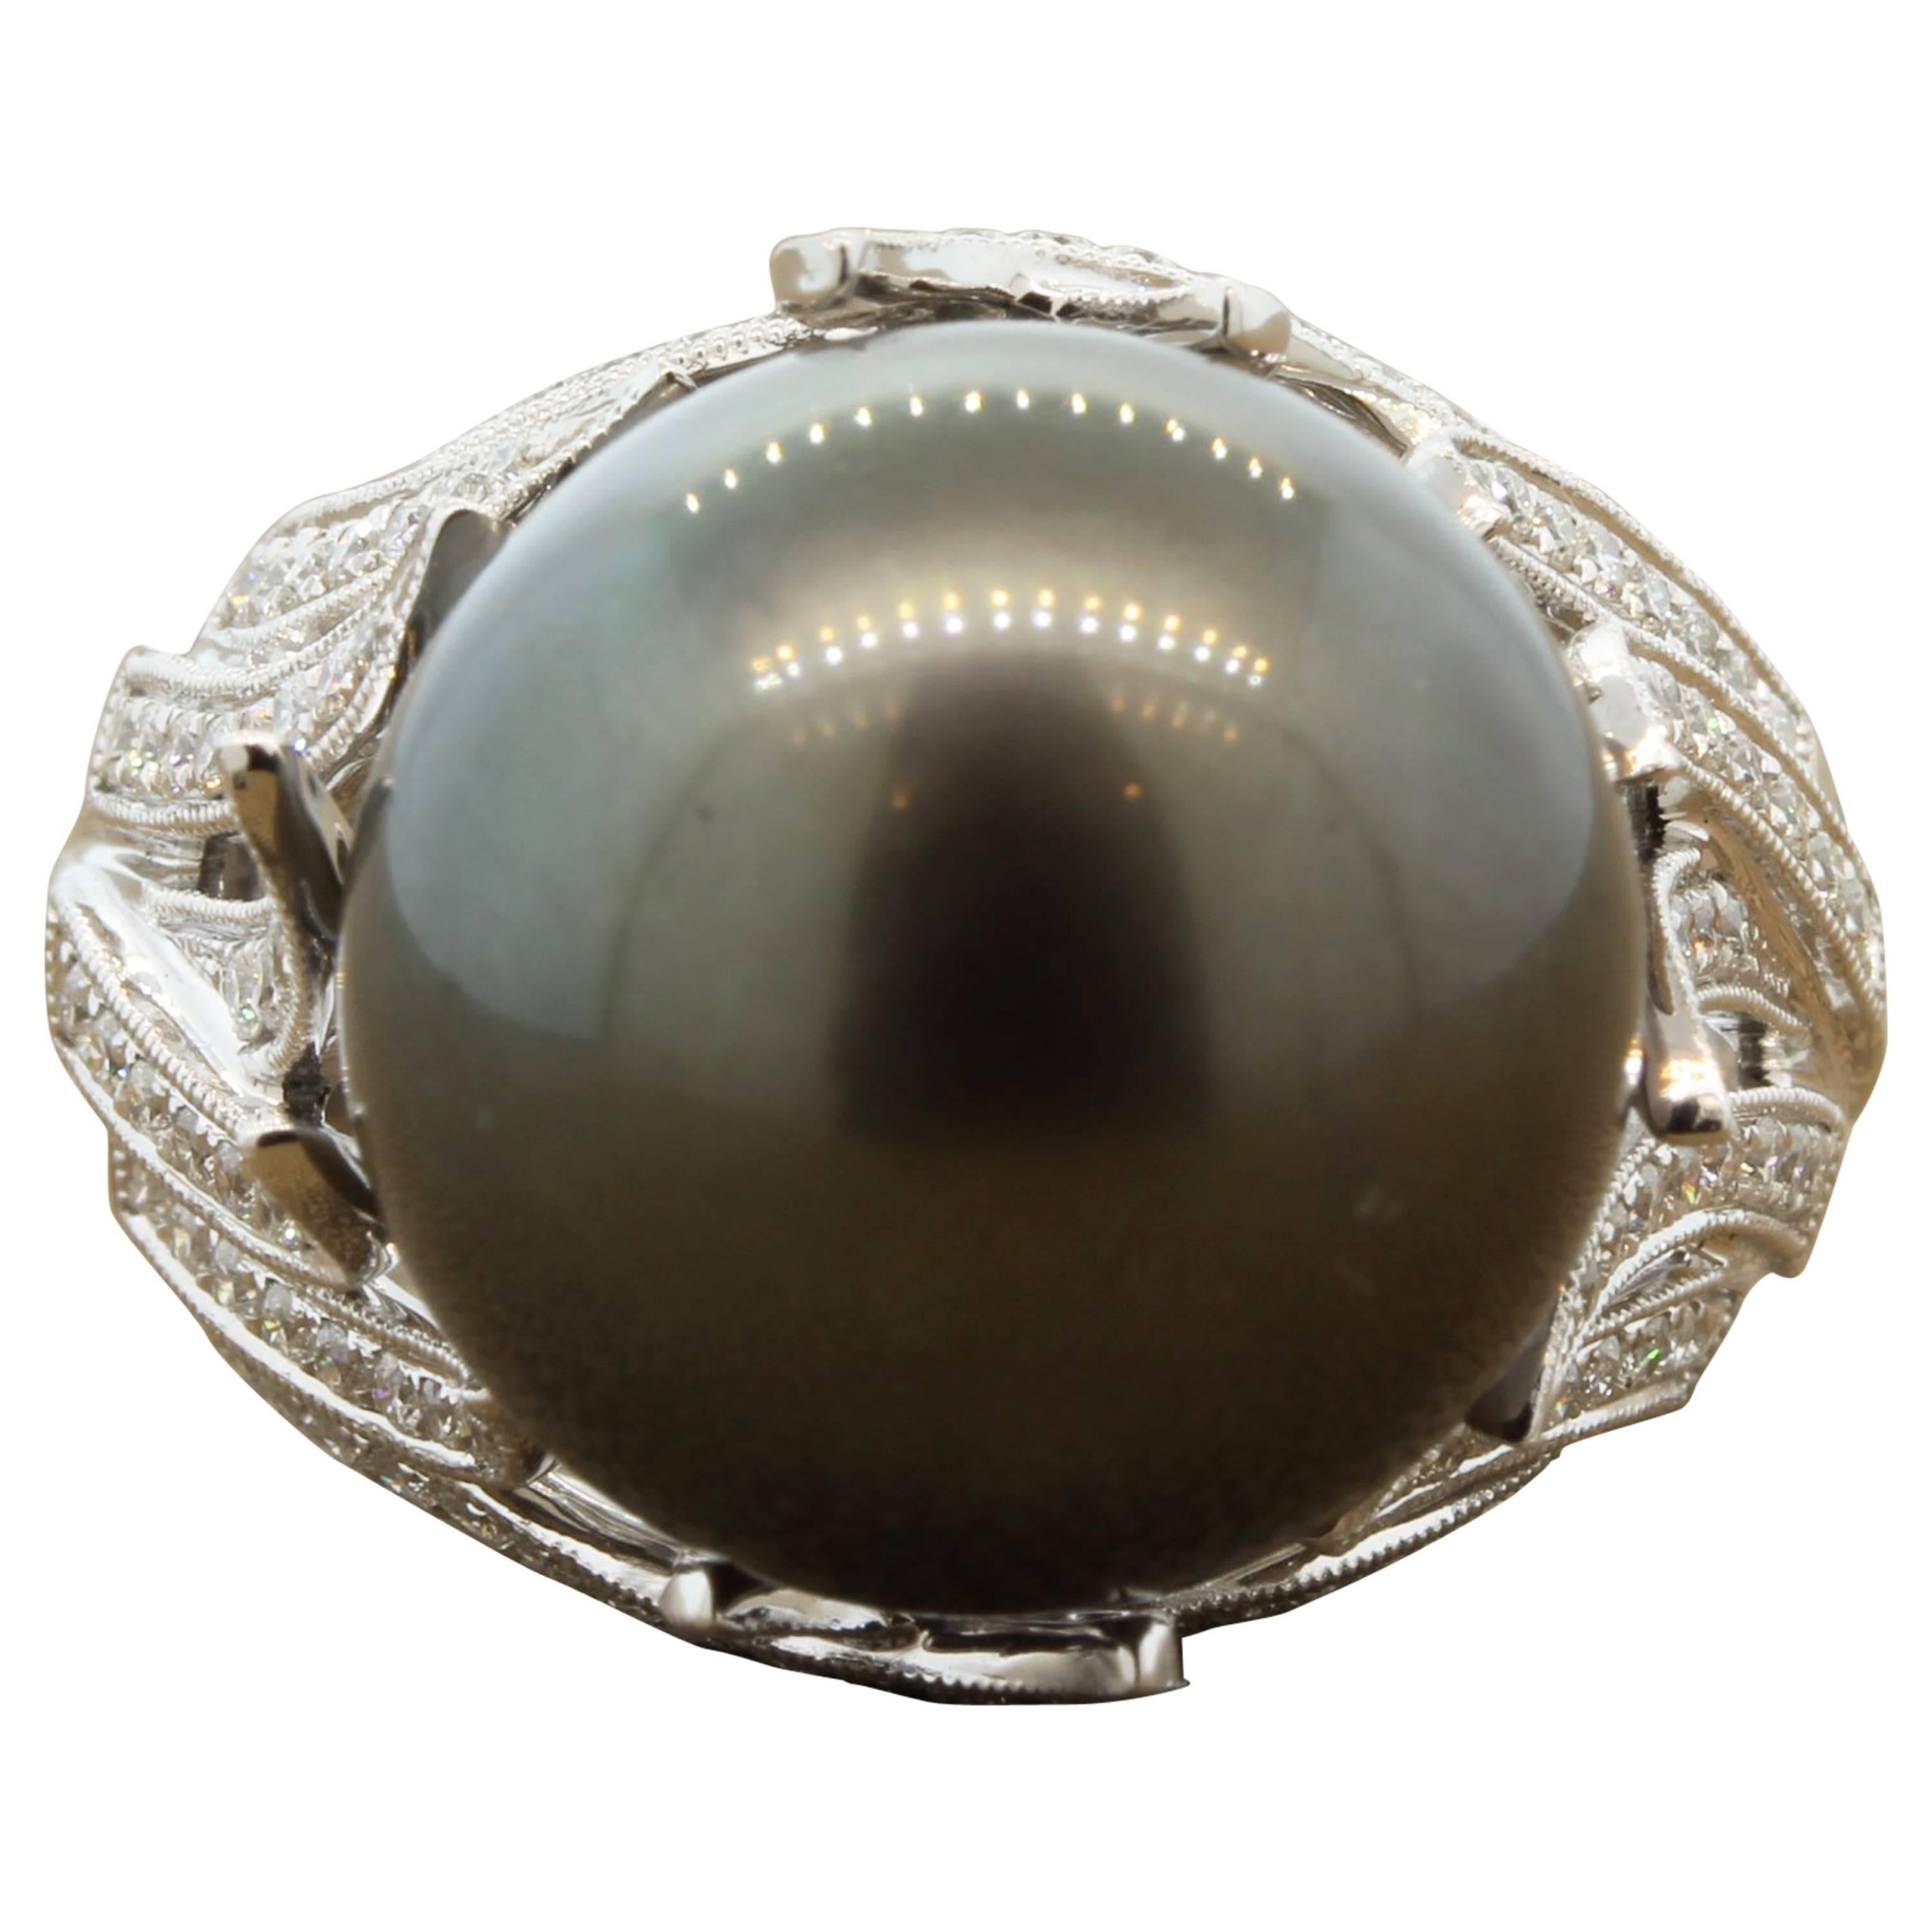 A contemporary gold ring featuring a 15.5mm Tahitian pearl, as large as the come. There are 0.66 carats of round cut diamonds set in 18K white gold. Every woman needs a classic pearl piece.
Size 7 
